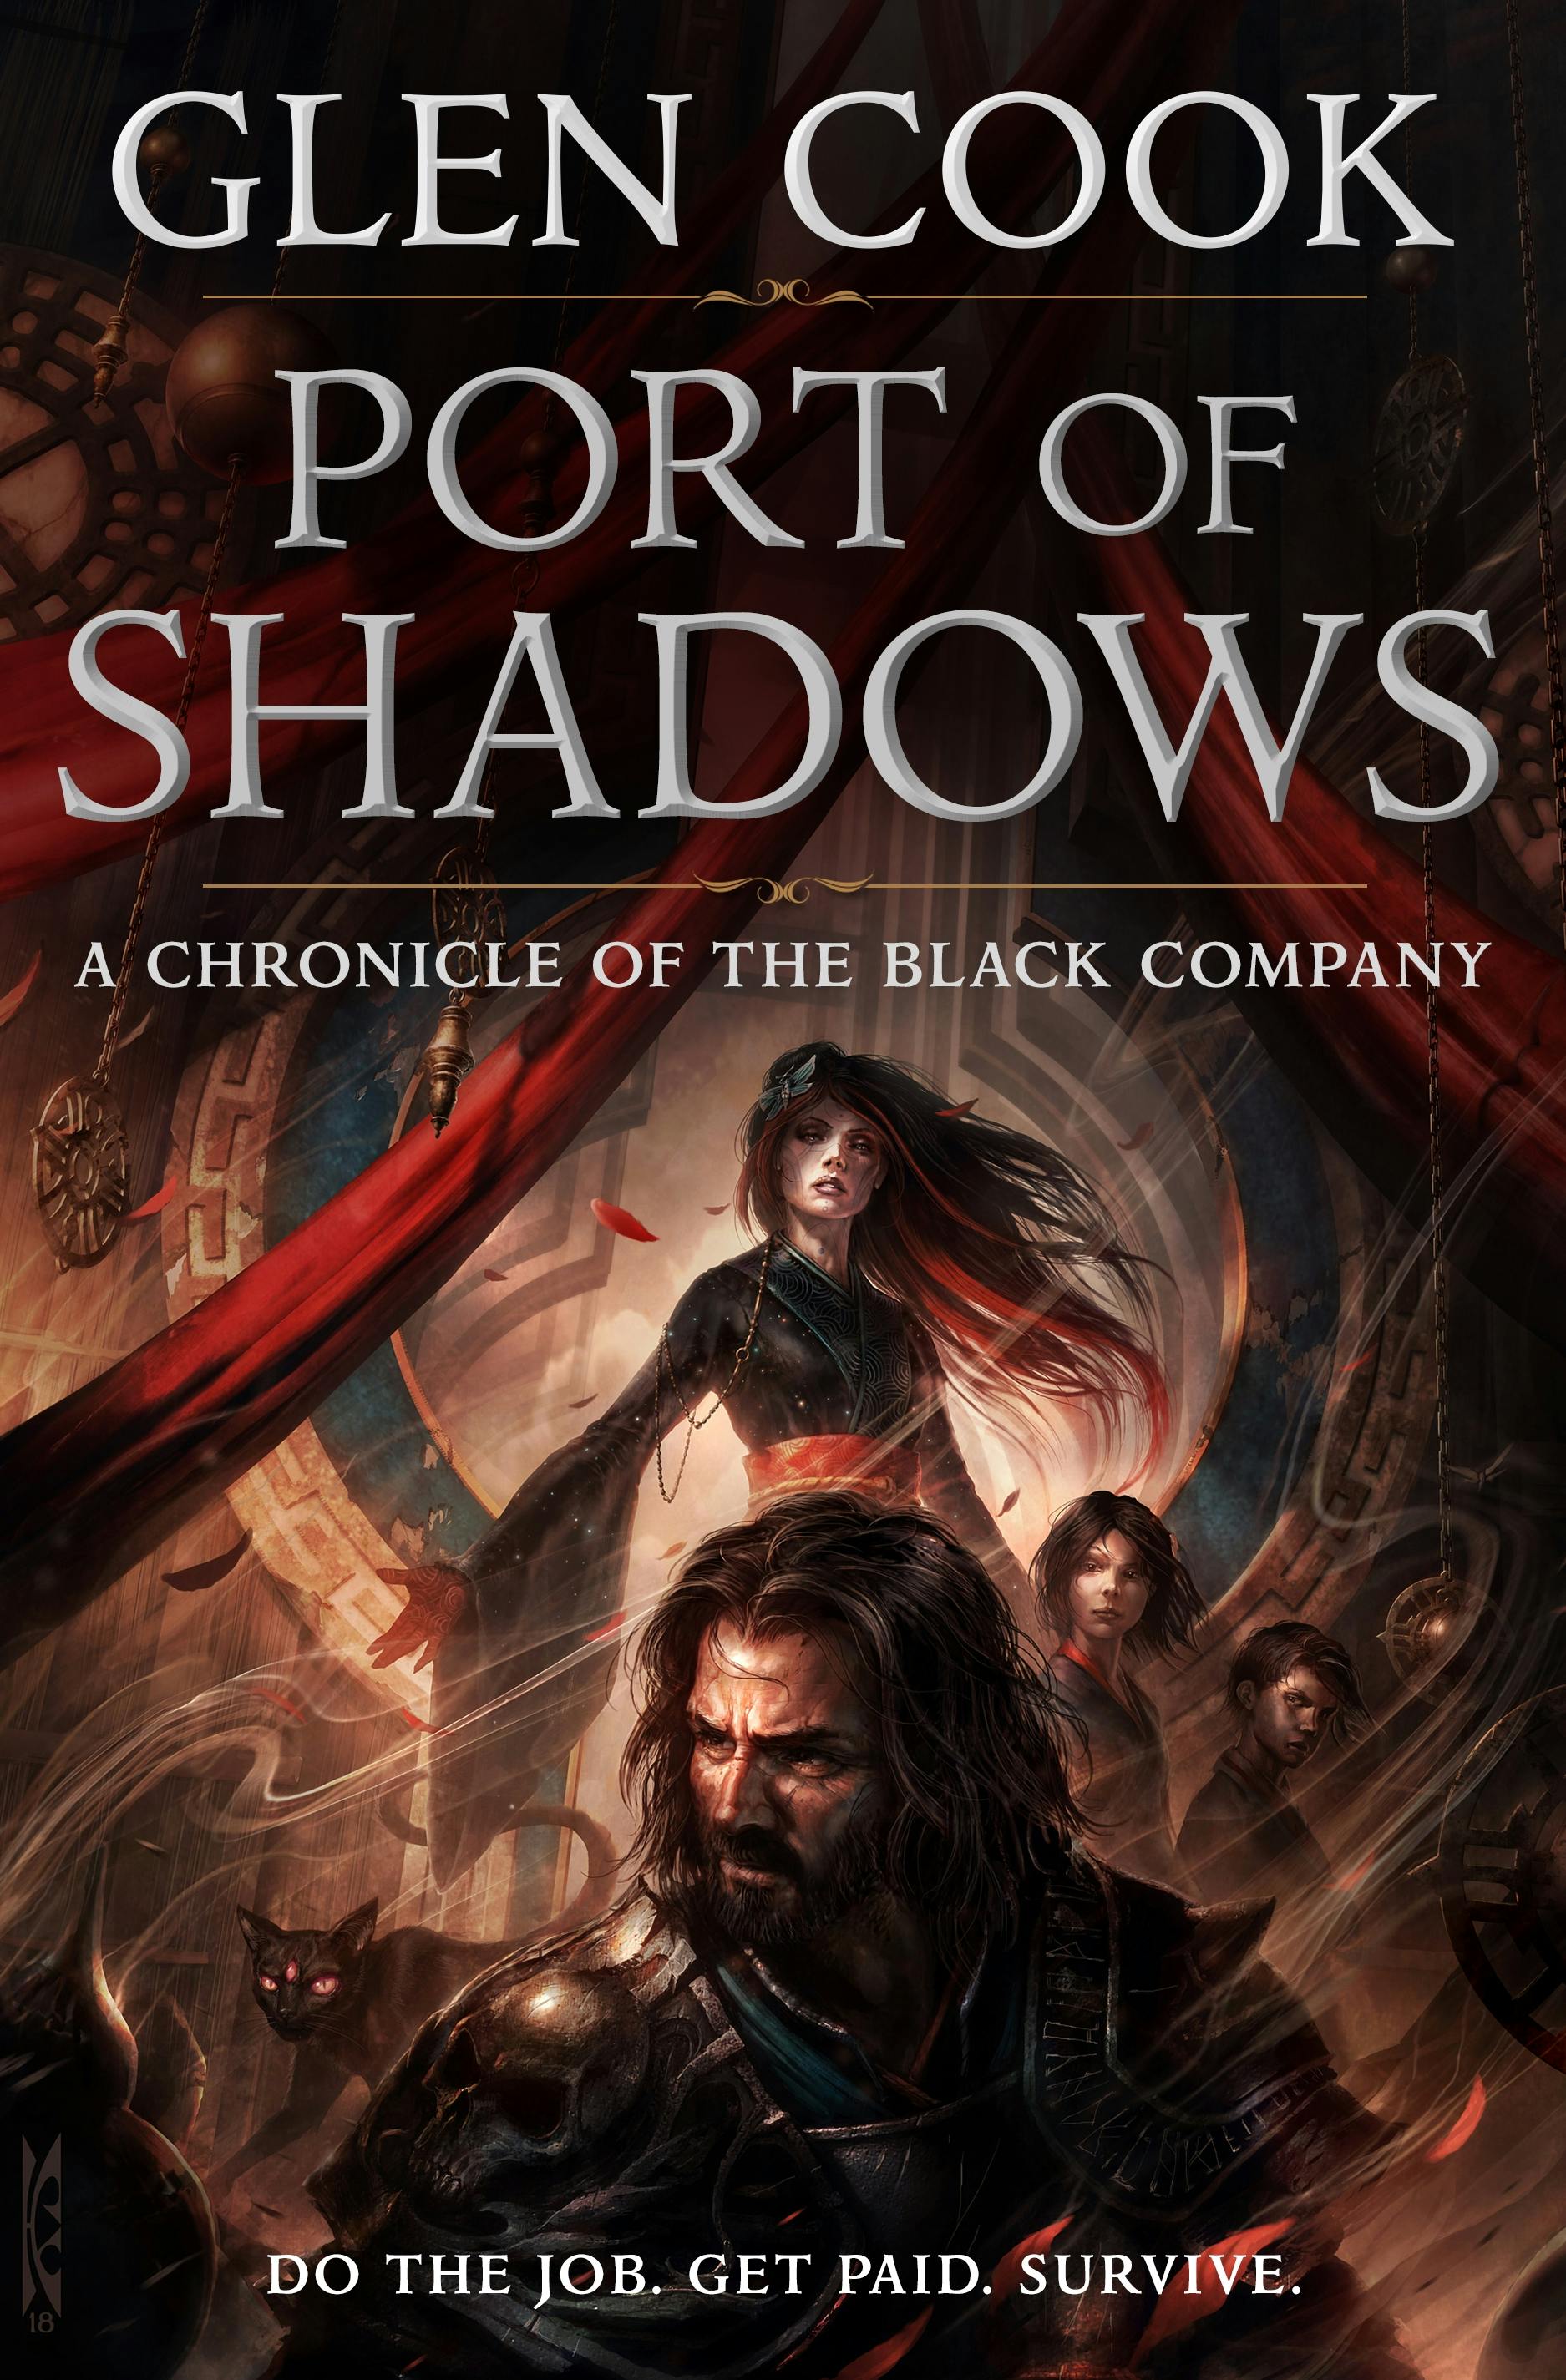 Cover for the book titled as: Port of Shadows